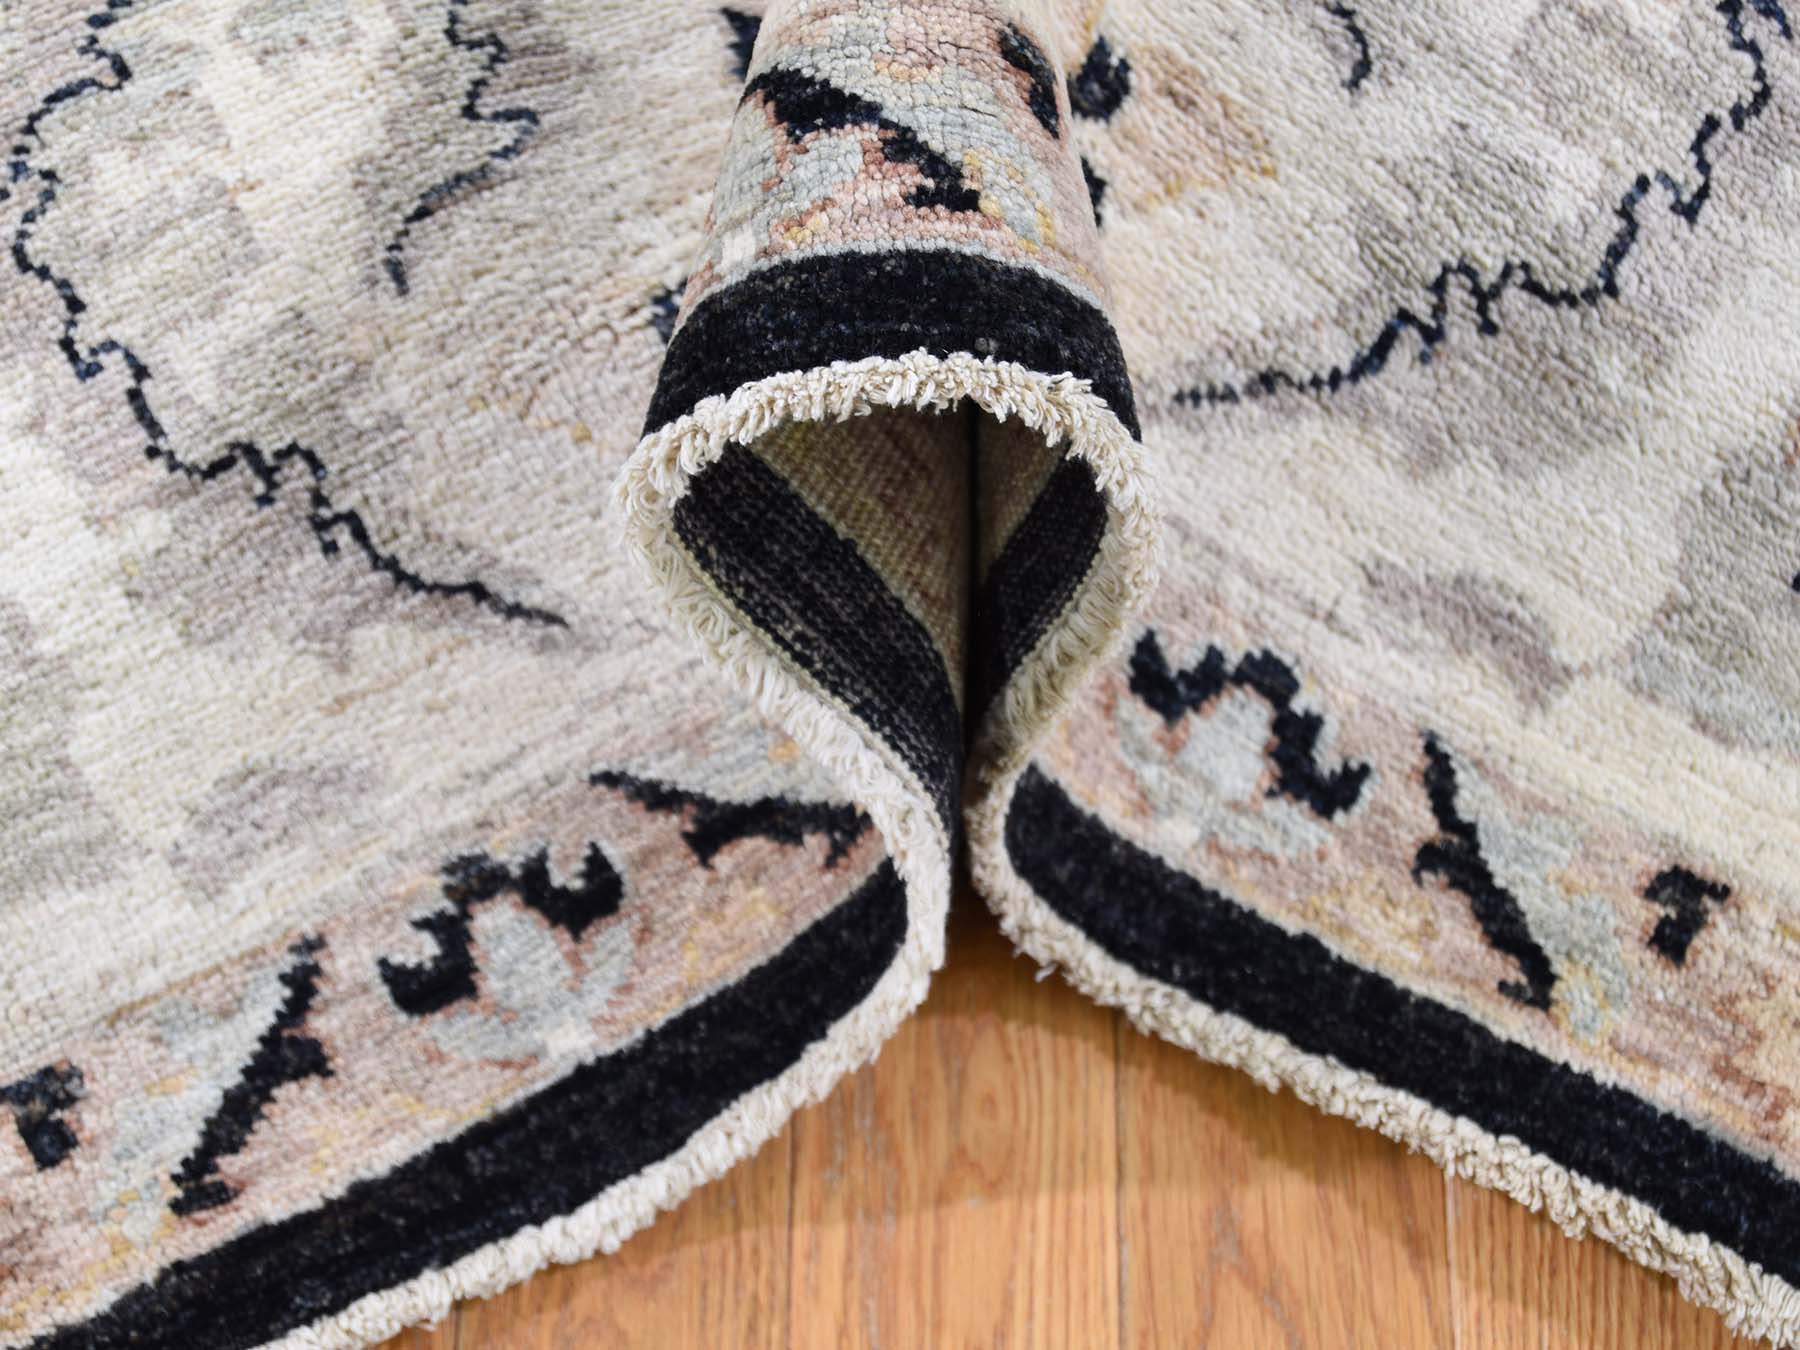 Clearance Rugs LUV368145